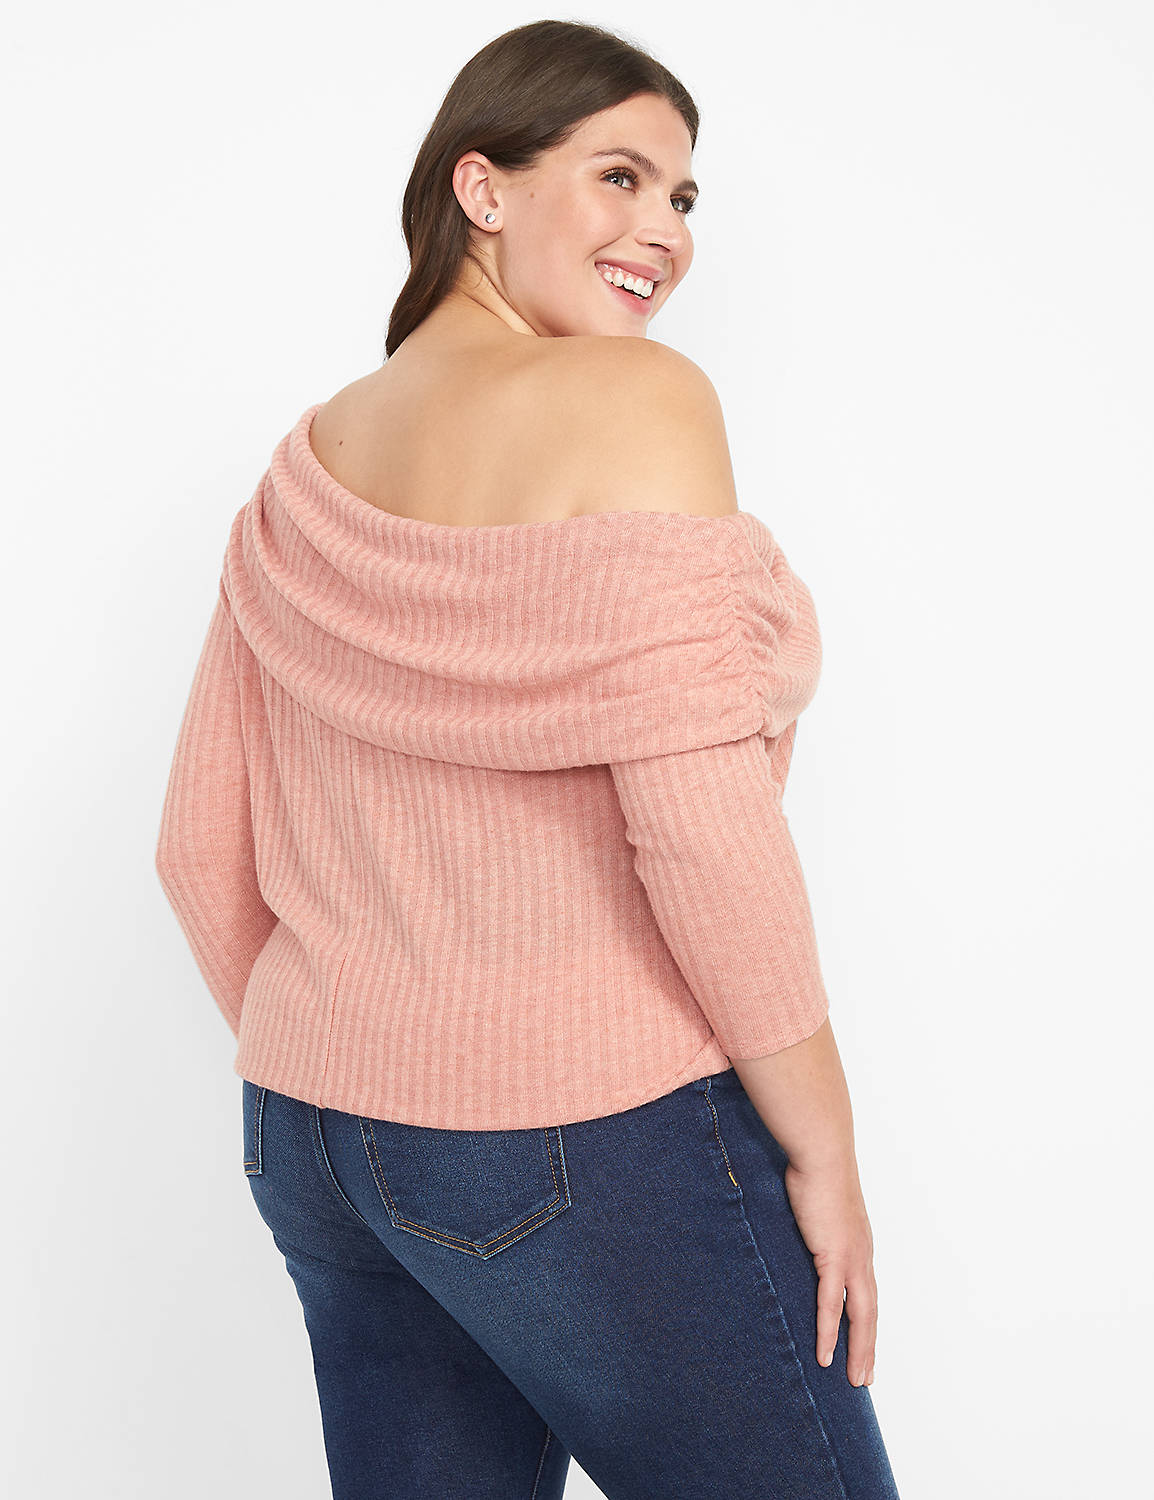 Long Sleeve Single Shoulder Knit To Product Image 2